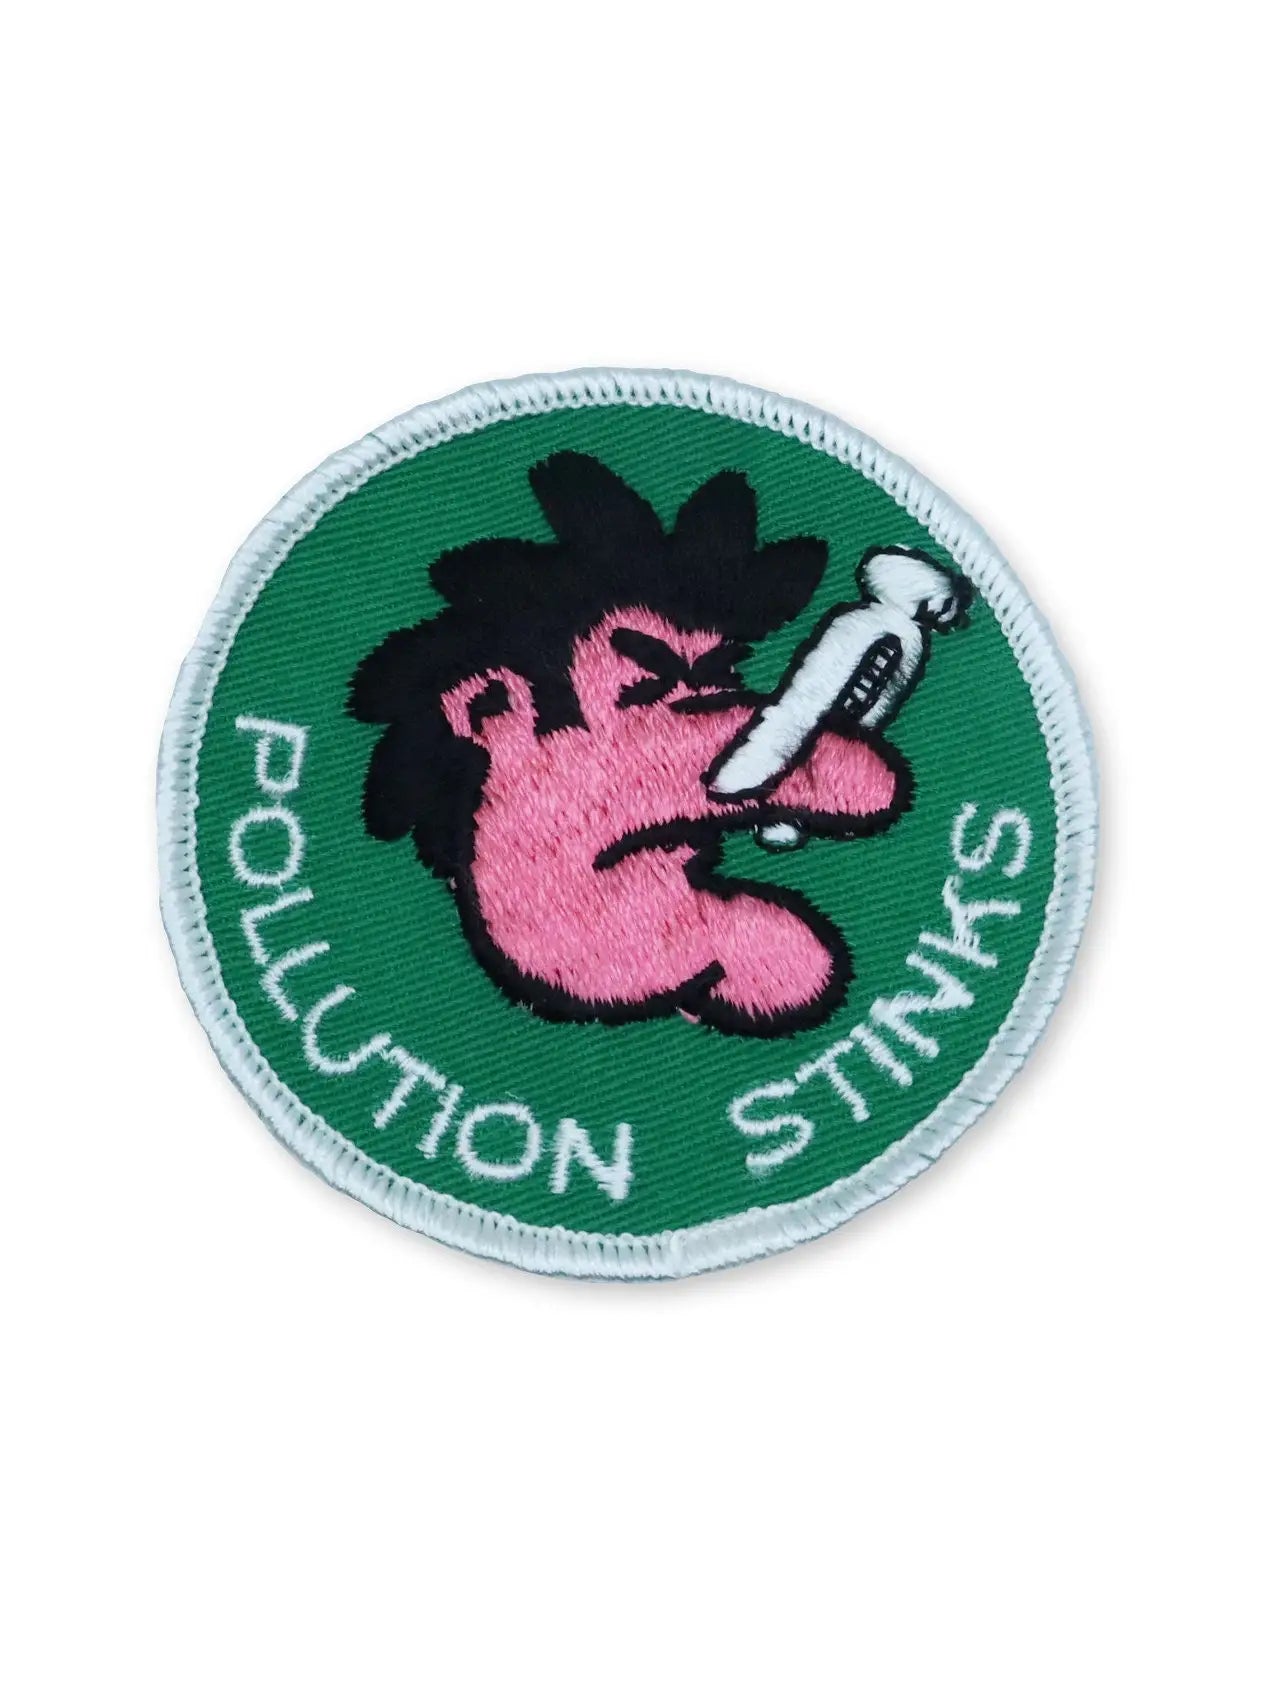 Round deadstock embroidered patch with a cartoon of someone holding their nose closed with a clothespin and the message “POLLUTION STINKS”. On a green background with a white border 